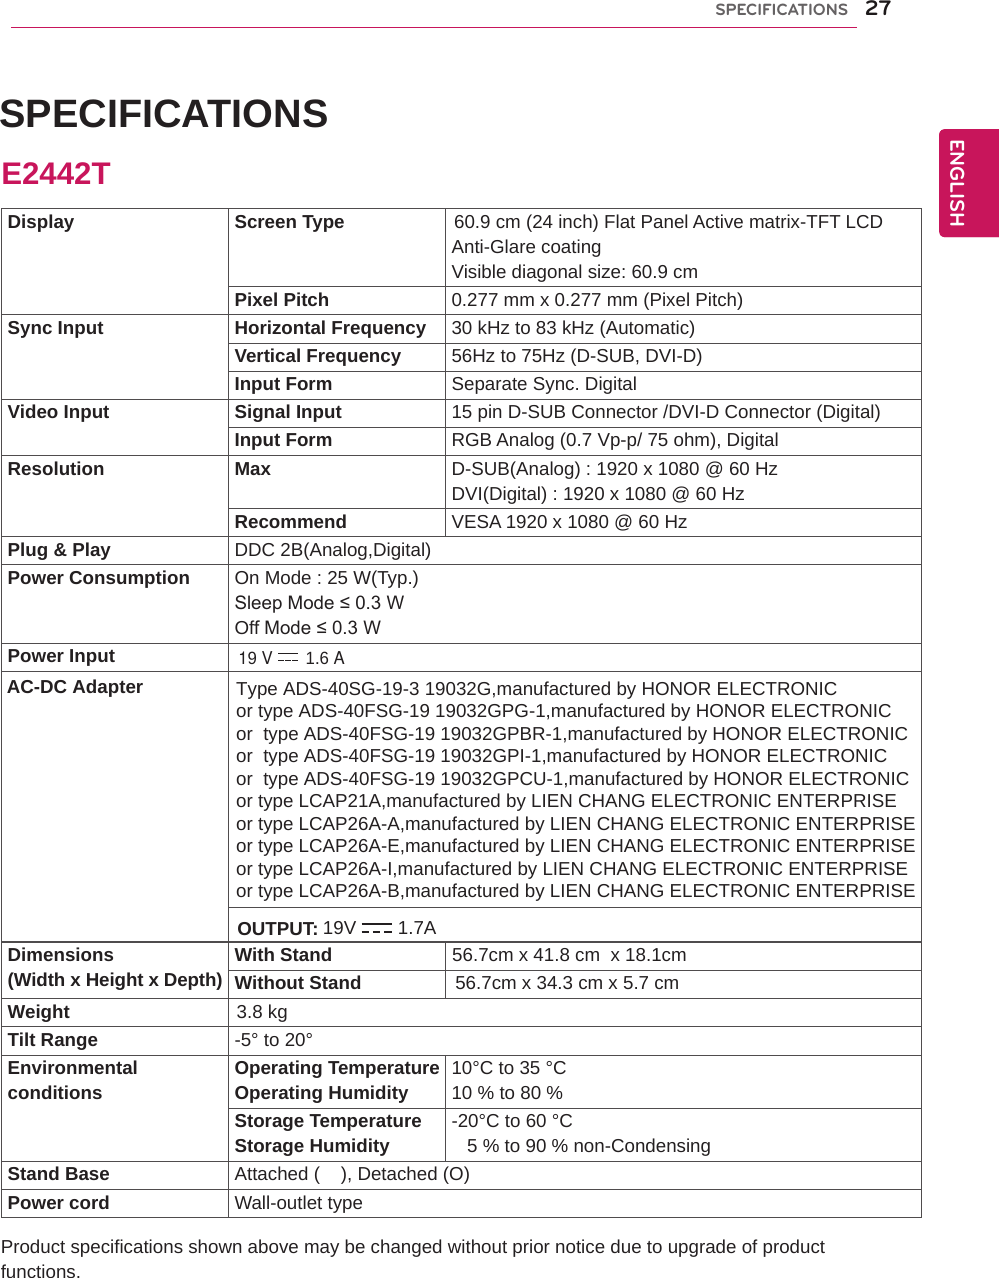 27ENGENGLISHSPECIFICATIONS SPECIFICATIONS Product specifications shown above may be changed without prior notice due to upgrade of product functions.Display Screen Type                     60.9 cm (24 inch) Flat Panel Active matrix-TFT LCDAnti-Glare coatingVisible diagonal size: 60.9 cmPixel Pitch 0.277 mm x 0.277 mm (Pixel Pitch)Sync Input Horizontal Frequency 30 kHz to 83 kHz (Automatic)Vertical Frequency 56Hz to 75Hz (D-SUB, DVI-D)Input Form Separate Sync. DigitalVideo Input Signal Input 15 pin D-SUB Connector /DVI-D Connector (Digital)Input Form RGB Analog (0.7 Vp-p/ 75 ohm), DigitalResolution Max D-SUB(Analog) : 1920 x 1080 @ 60 HzDVI(Digital) : 1920 x 1080 @ 60 HzRecommend VESA 1920 x 1080 @ 60 HzPlug &amp; Play DDC 2B(Analog,Digital)Power Consumption On Mode : 25 W(Typ.)Sleep Mode ≤ 0.3 W Off Mode ≤ 0.3 W Power InputDimensions(Width x Height x Depth) With Stand                       56.7cm x 41.8 cm  x 18.1cmWithout Stand                  56.7cm x 34.3 cm x 5.7 cmWeight                                3.8 kgTilt Range -5° to 20°Environmentalconditions Operating TemperatureOperating Humidity 10°C to 35 °C10 % to 80 % Storage TemperatureStorage Humidity -20°C to 60 °C   5 % to 90 % non-CondensingStand Base Attached (    ), Detached (O)Power cord Wall-outlet typeE2442T19 V 1.6 A AC-DC Adapter19V 1.7AType ADS-40SG-19-3 19032G,manufactured by HONOR ELECTRONICor type ADS-40FSG-19 19032GPG-1,manufactured by HONOR ELECTRONICor  type ADS-40FSG-19 19032GPBR-1,manufactured by HONOR ELECTRONICor  type ADS-40FSG-19 19032GPI-1,manufactured by HONOR ELECTRONIC or  type ADS-40FSG-19 19032GPCU-1,manufactured by HONOR ELECTRONIC or type LCAP21A,manufactured by LIEN CHANG ELECTRONIC ENTERPRISEor type LCAP26A-A,manufactured by LIEN CHANG ELECTRONIC ENTERPRISEor type LCAP26A-E,manufactured by LIEN CHANG ELECTRONIC ENTERPRISEor type LCAP26A-I,manufactured by LIEN CHANG ELECTRONIC ENTERPRISEor type LCAP26A-B,manufactured by LIEN CHANG ELECTRONIC ENTERPRISEOUTPUT: